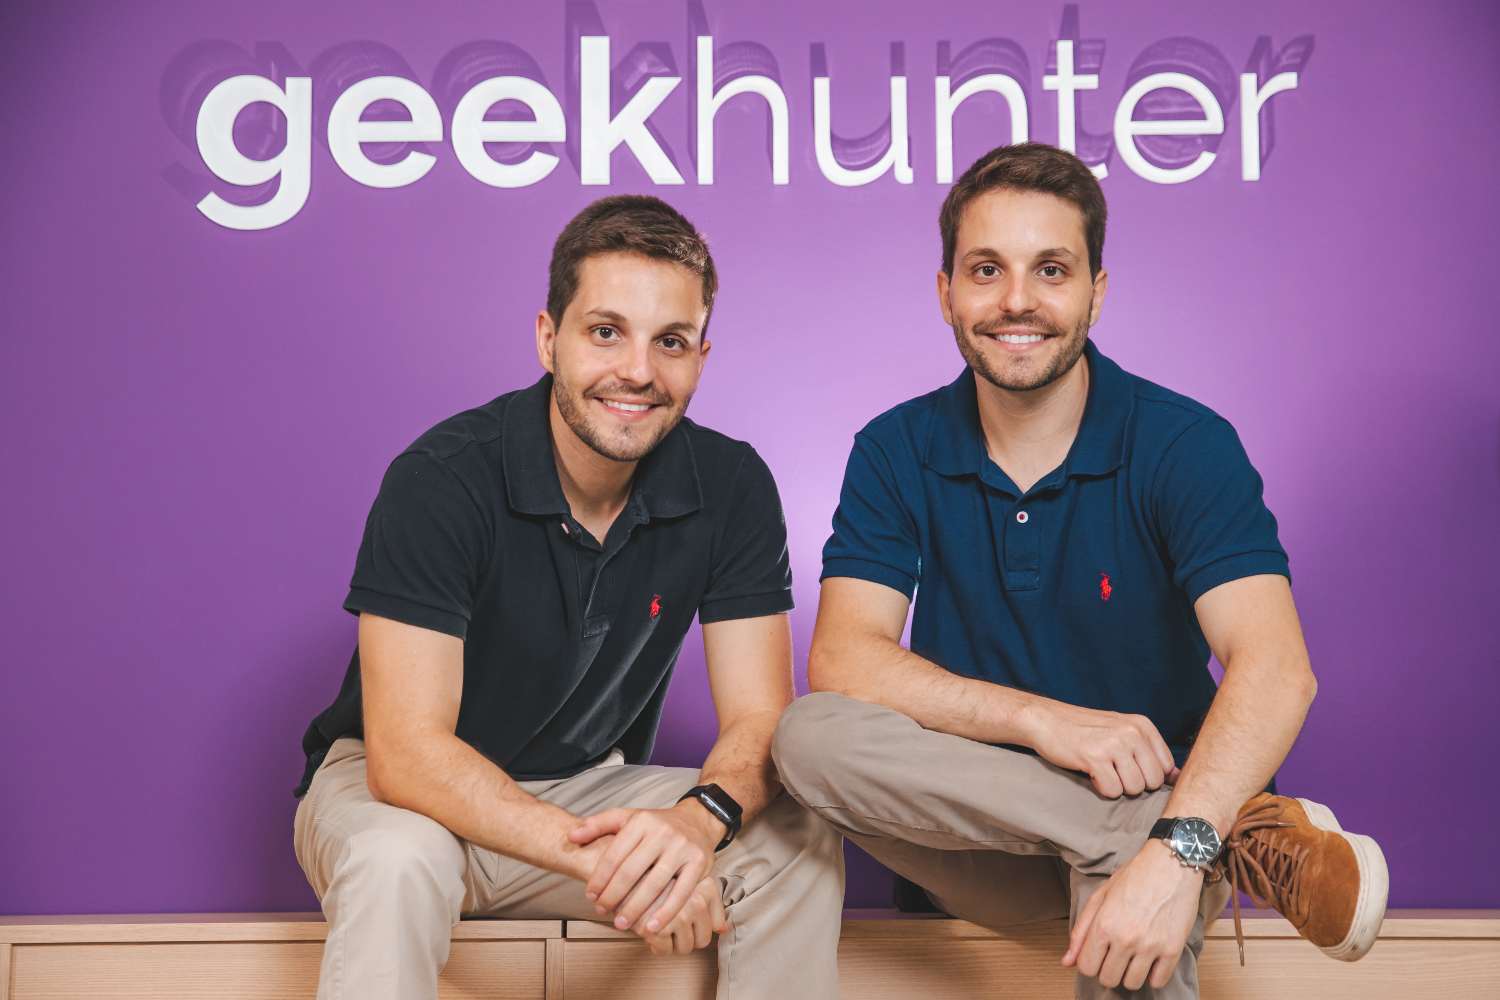 GeekHunter was founded in Florianópolis (SC) in 2015 by twin brothers Tomás and Celso Ferrari.